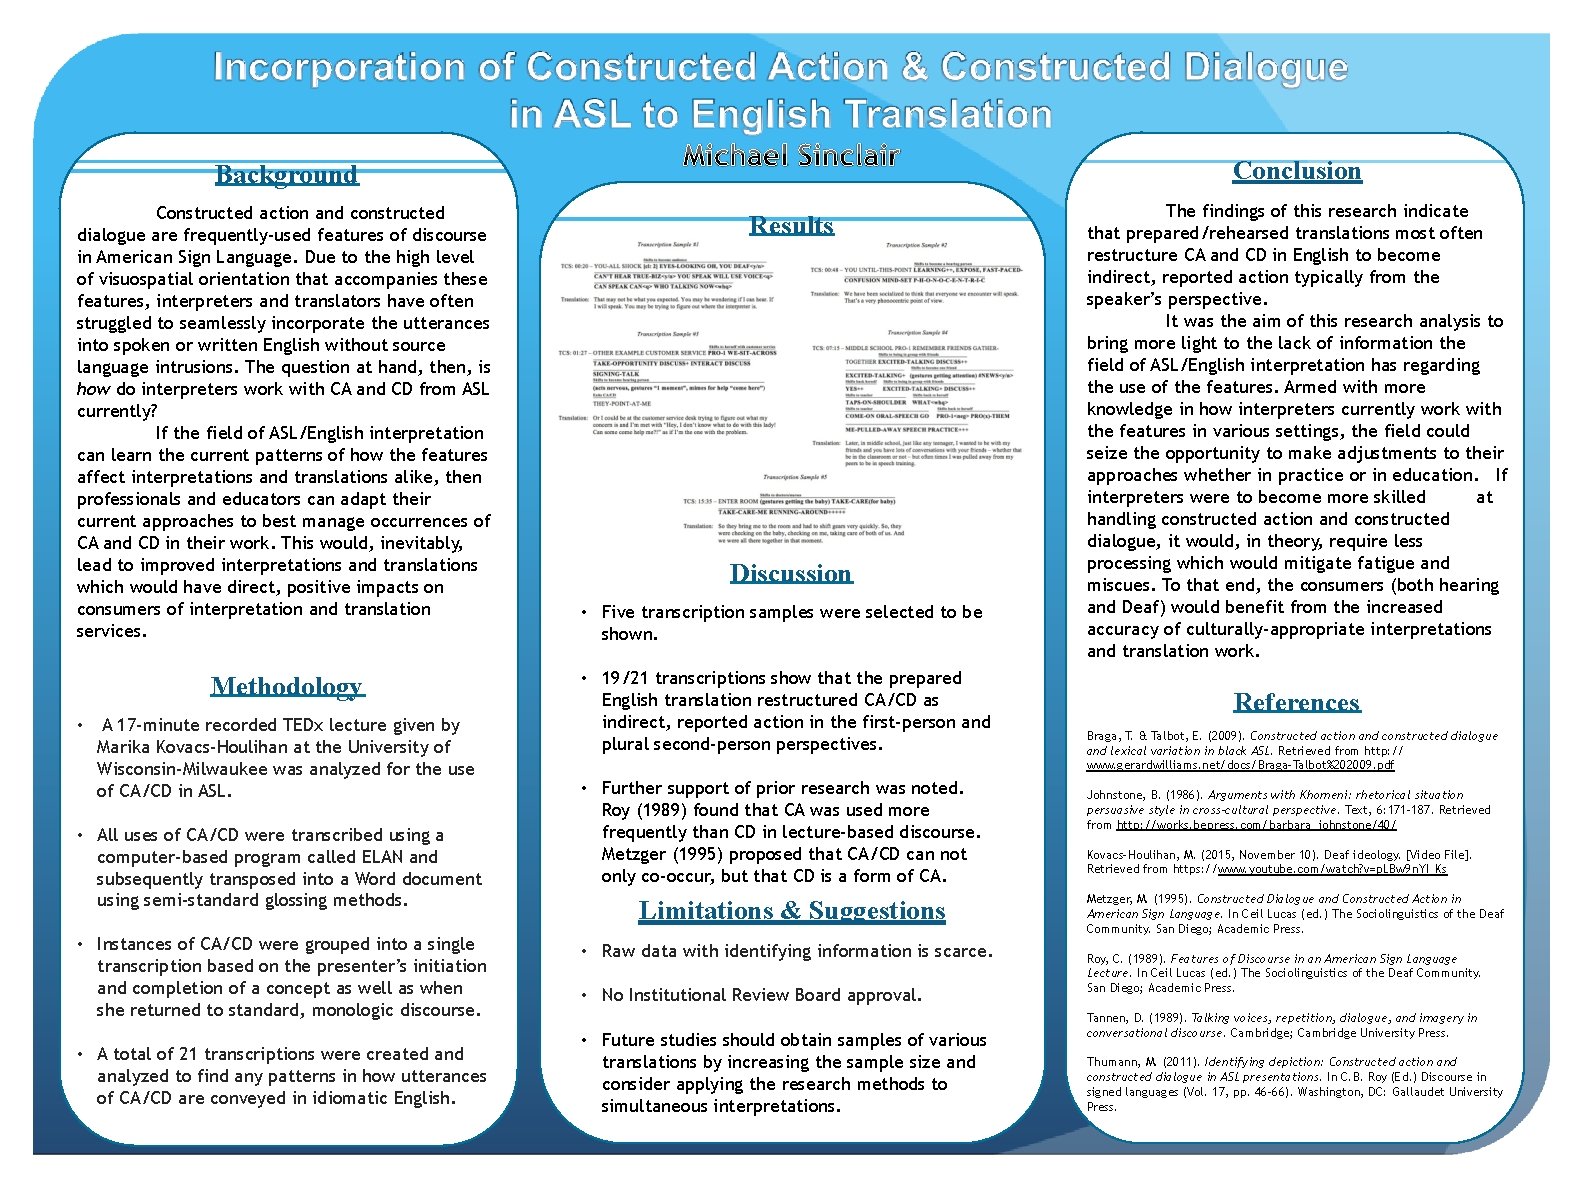 Background Conclusion Constructed action and constructed dialogue are frequently-used features of discourse in American